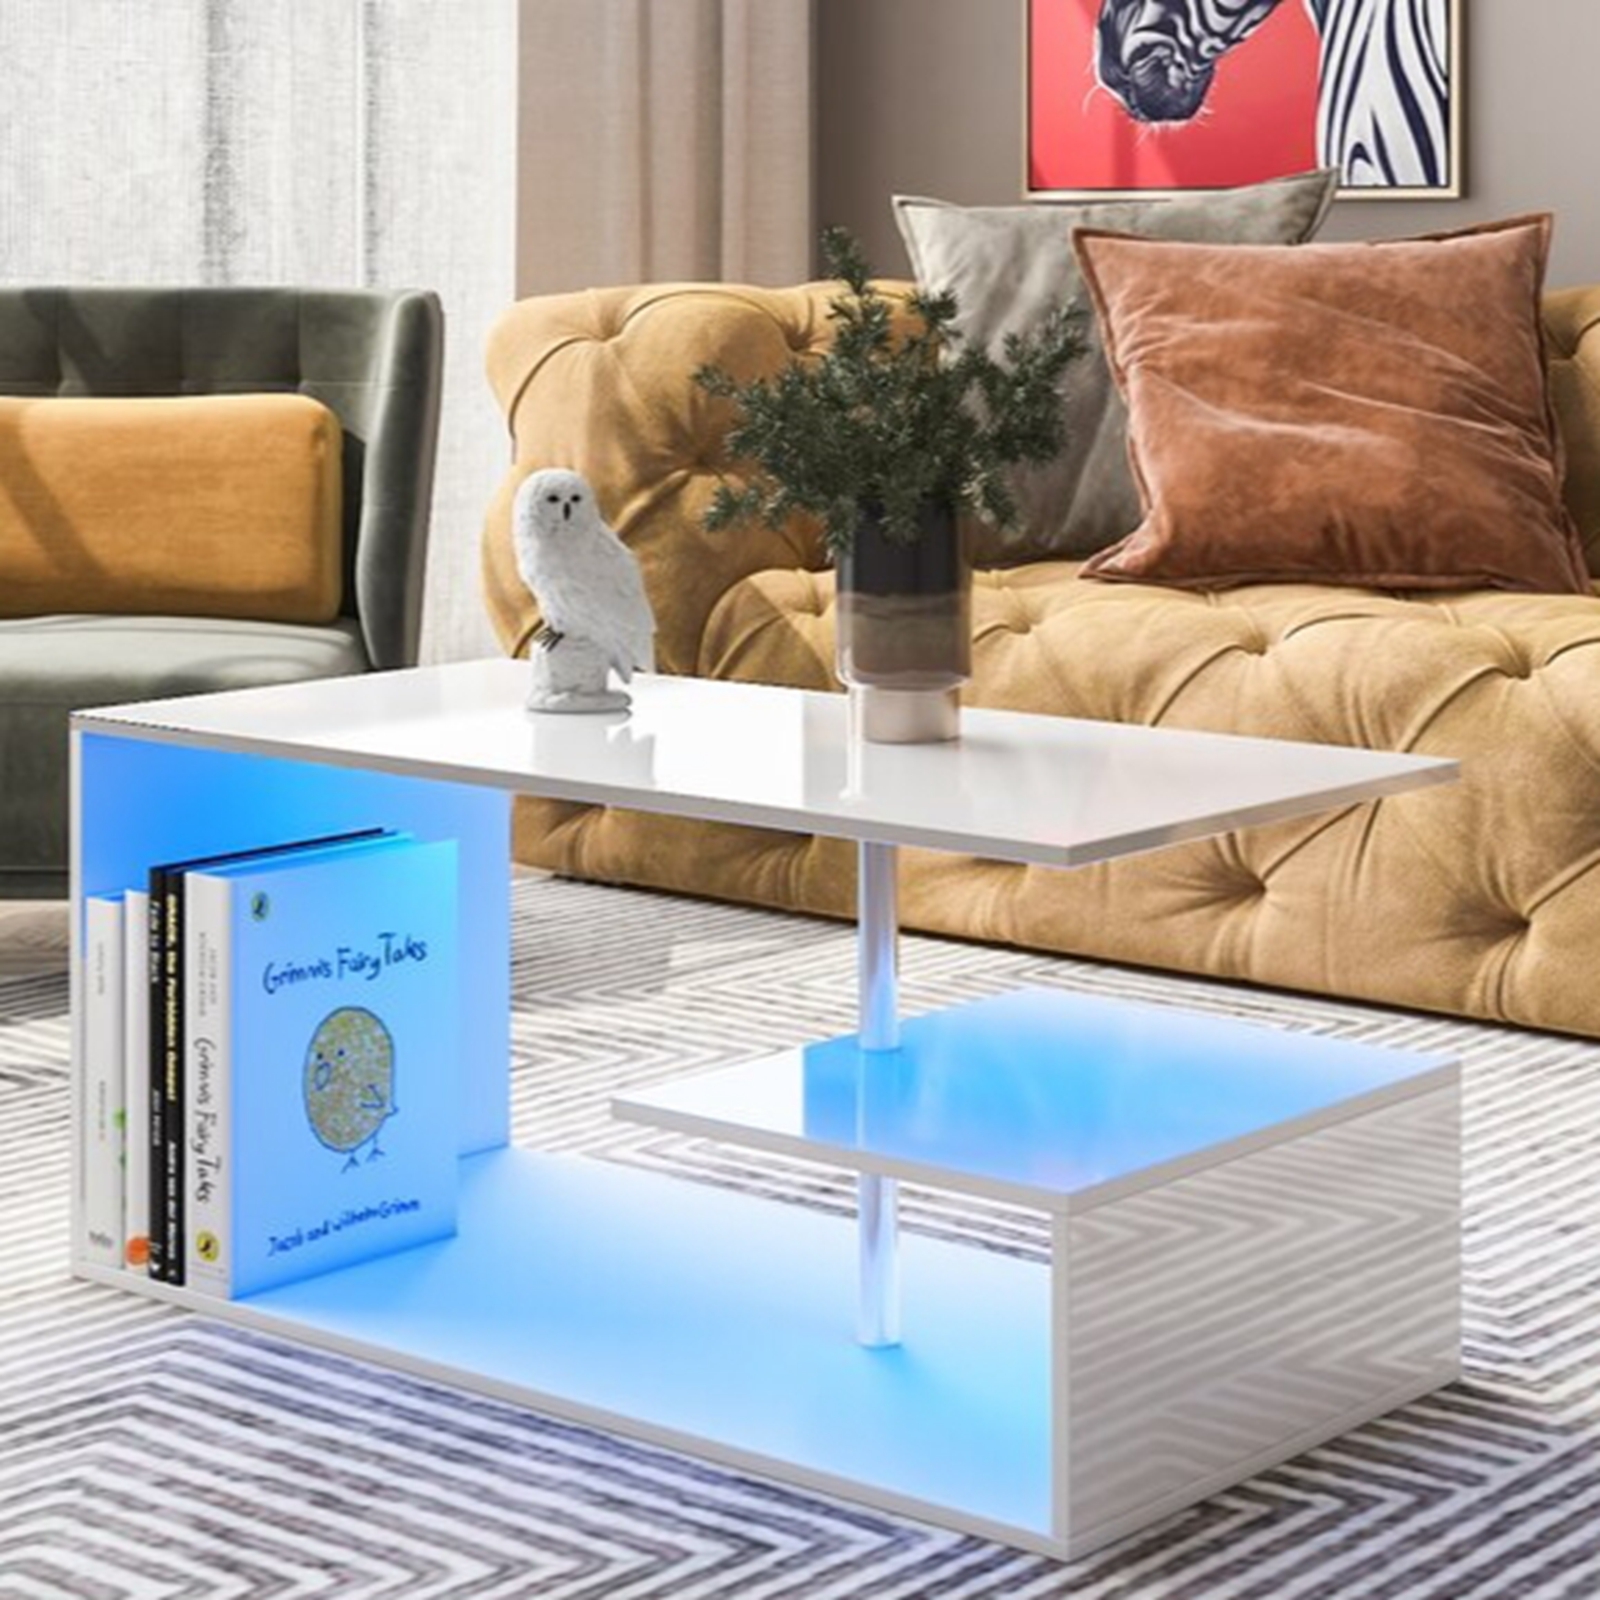 Hommpa High Gloss Coffee Table with Open Shelf LED Lights Smart APP Control White Center Sofa End Table S Shaped Modern Cocktail Tables with for Living Room - image 1 of 11